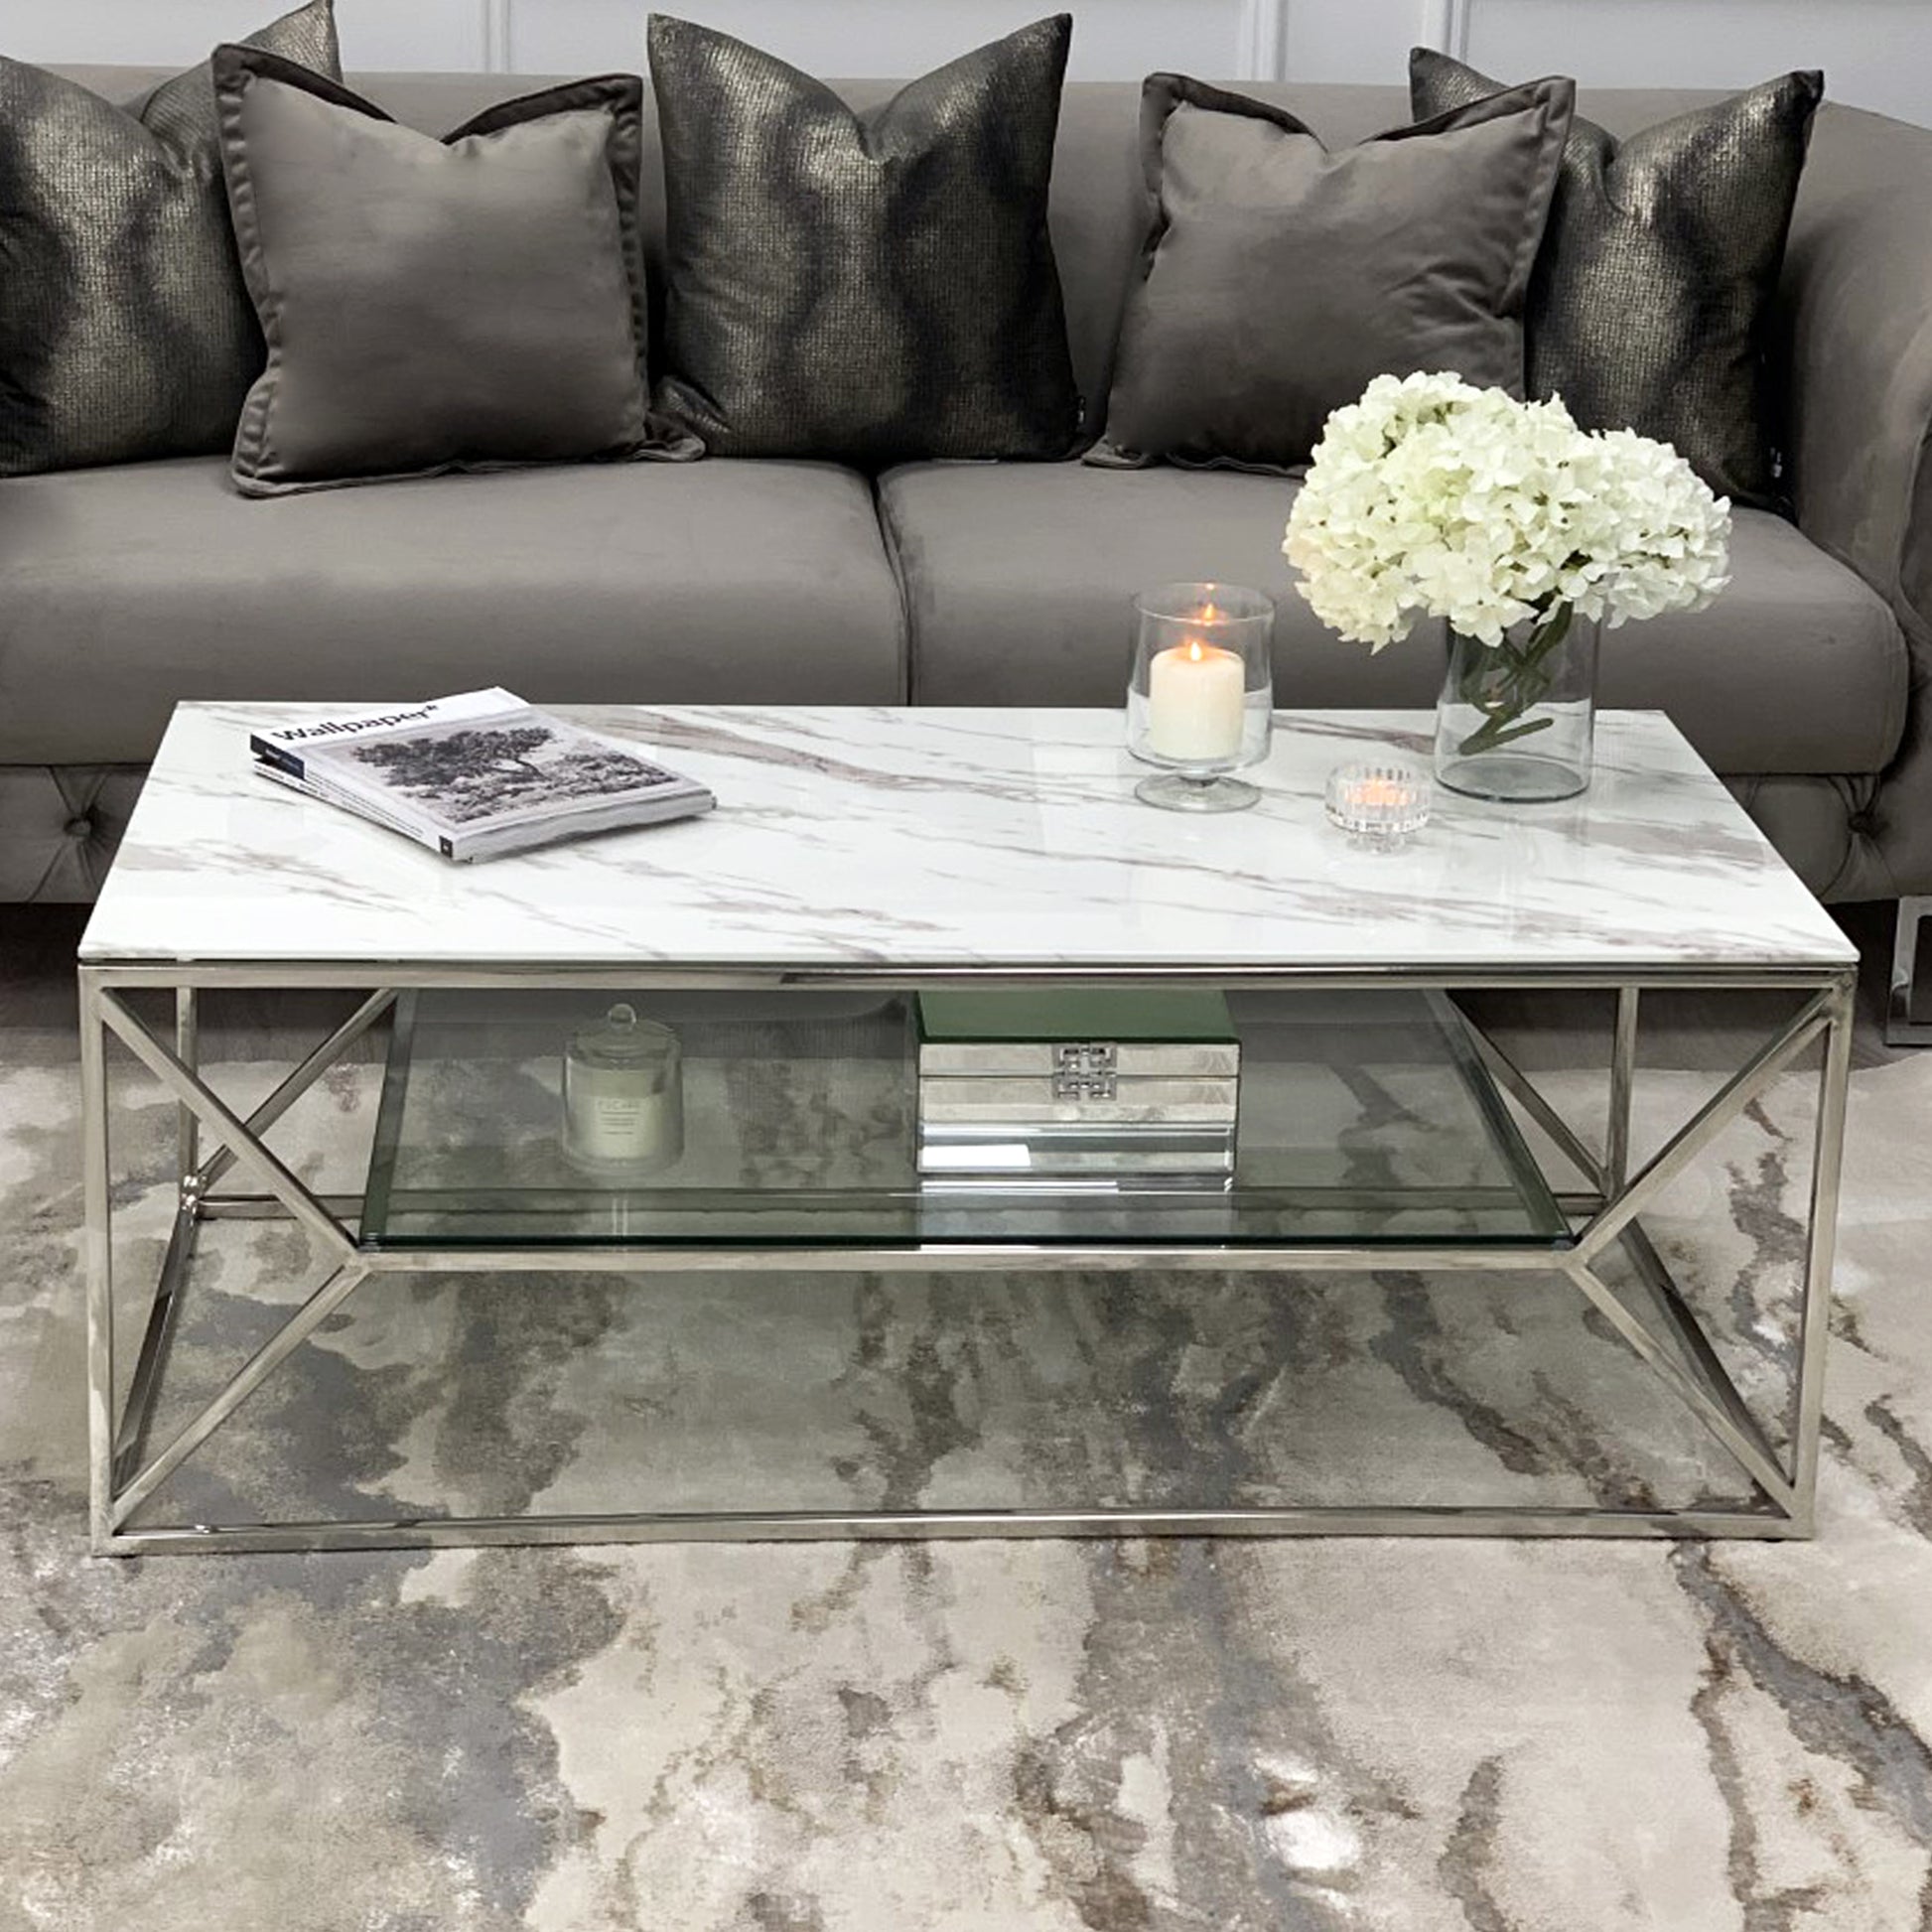 Ava White Marble Effect Coffee Table With Silver Legs